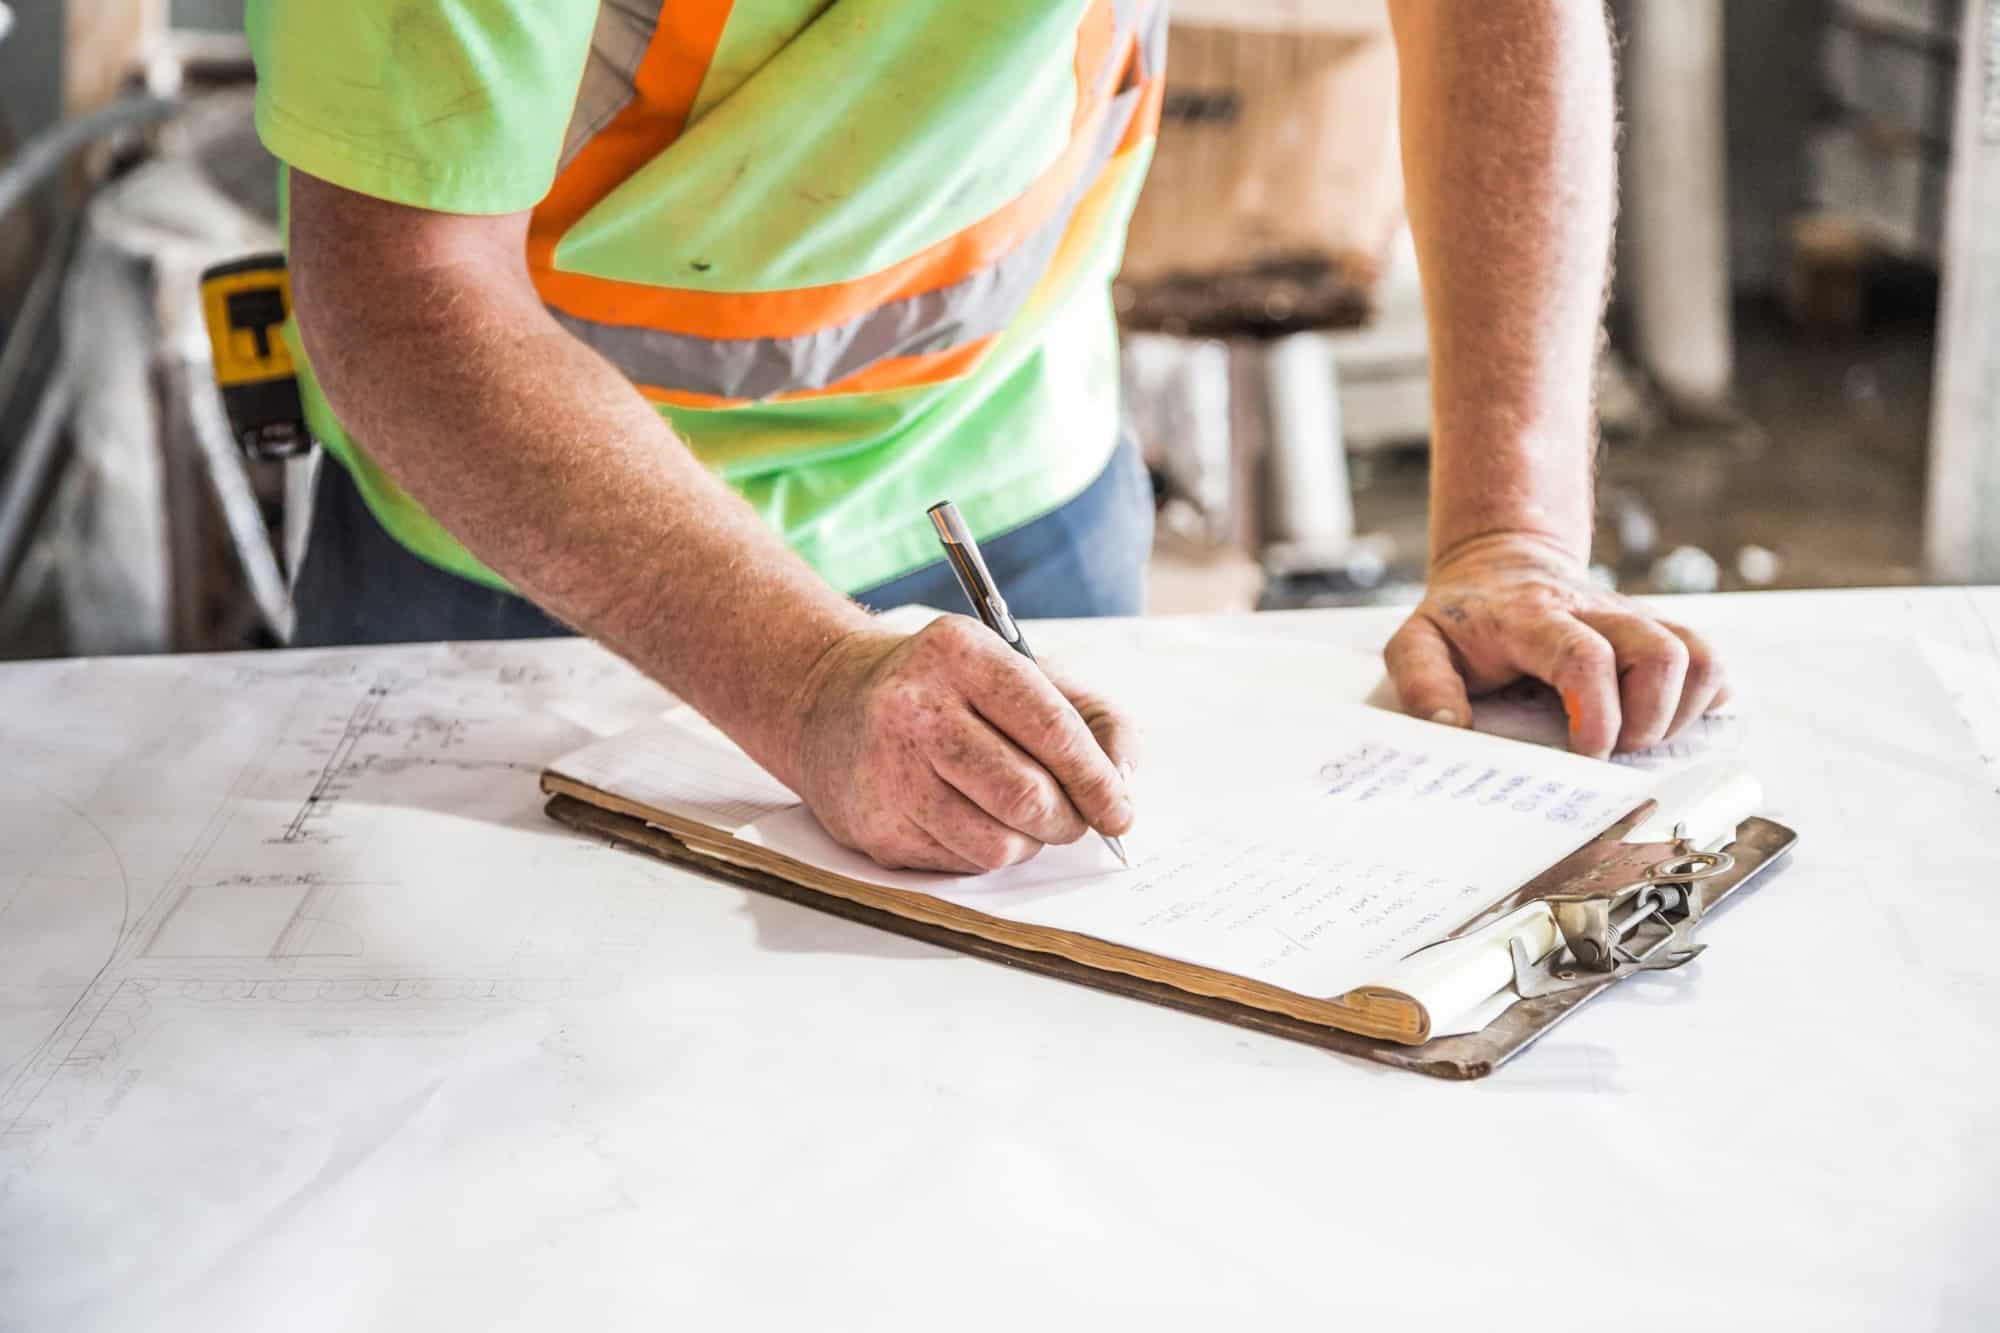 What to Look Out For in Your Construction Contract